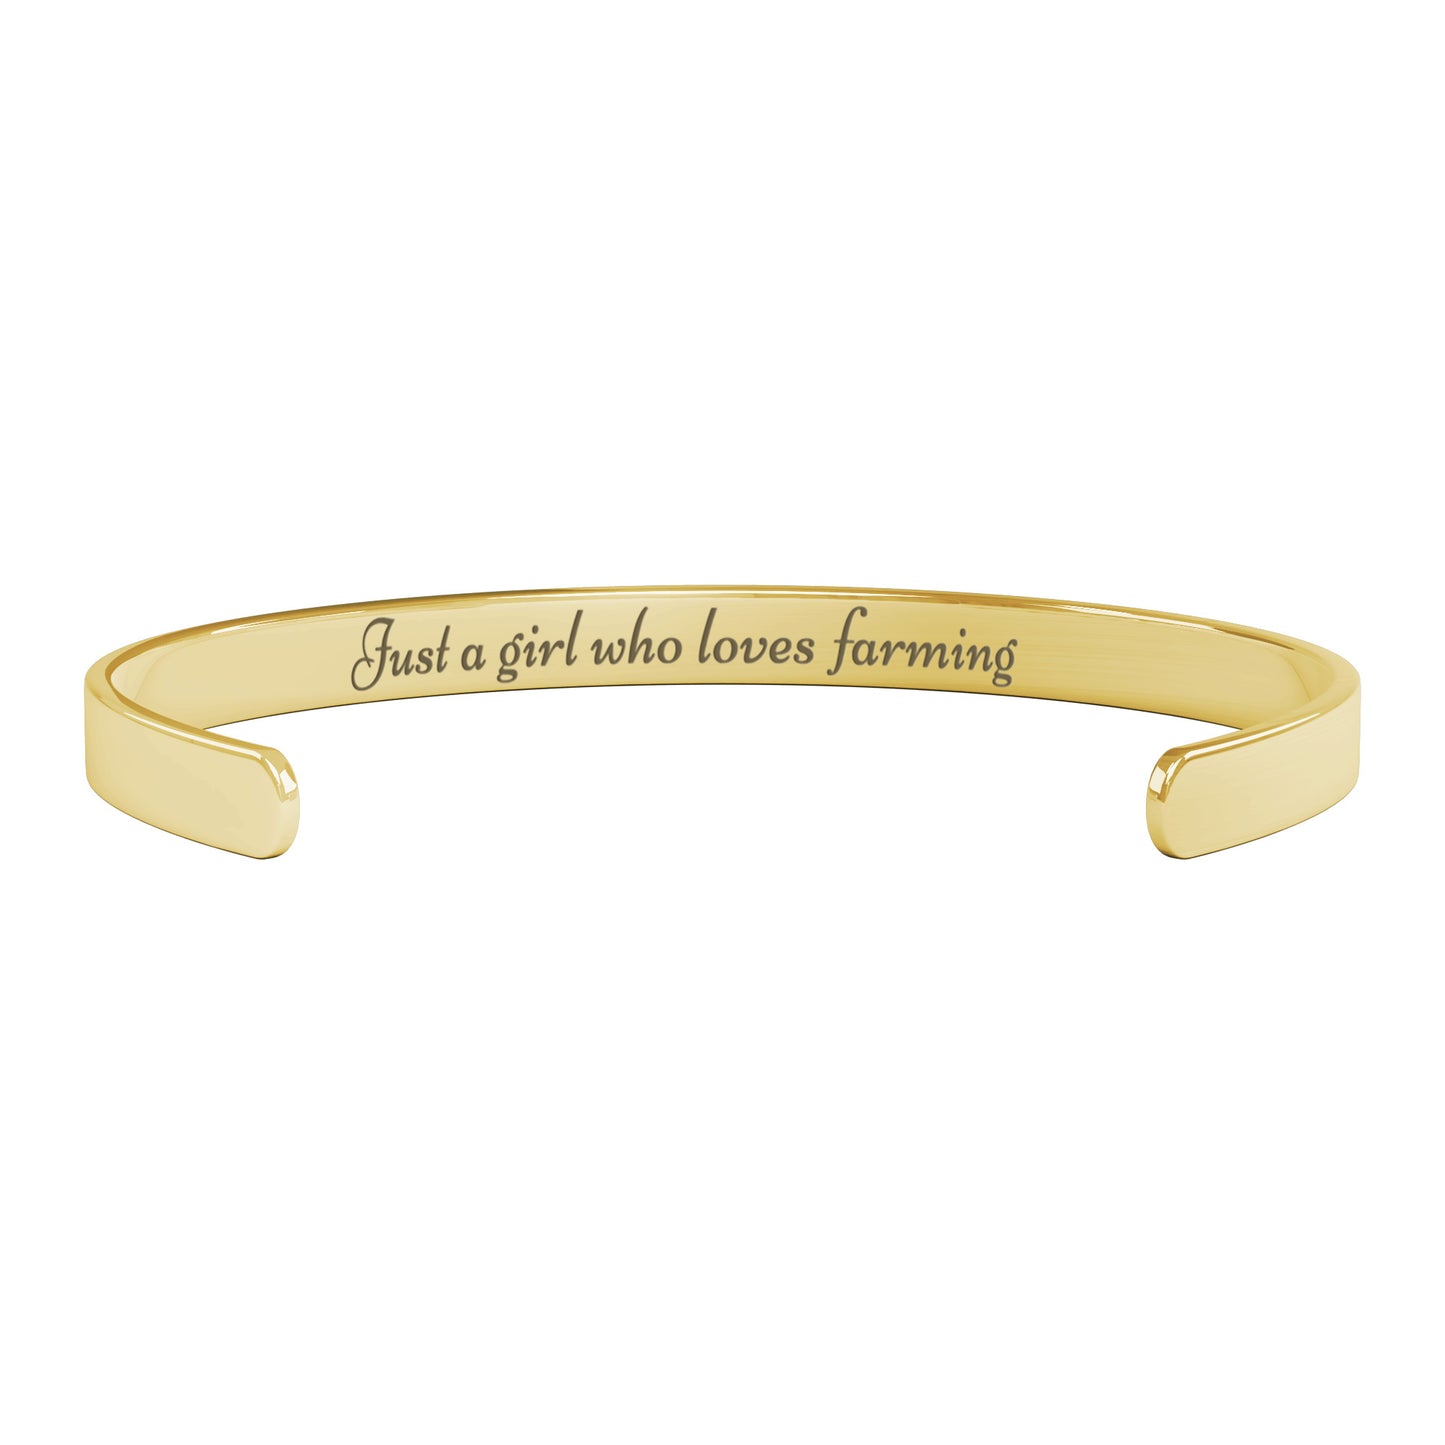 Just a Girl Who Loves Farming Cuff Bracelet - FREE SHIPPING